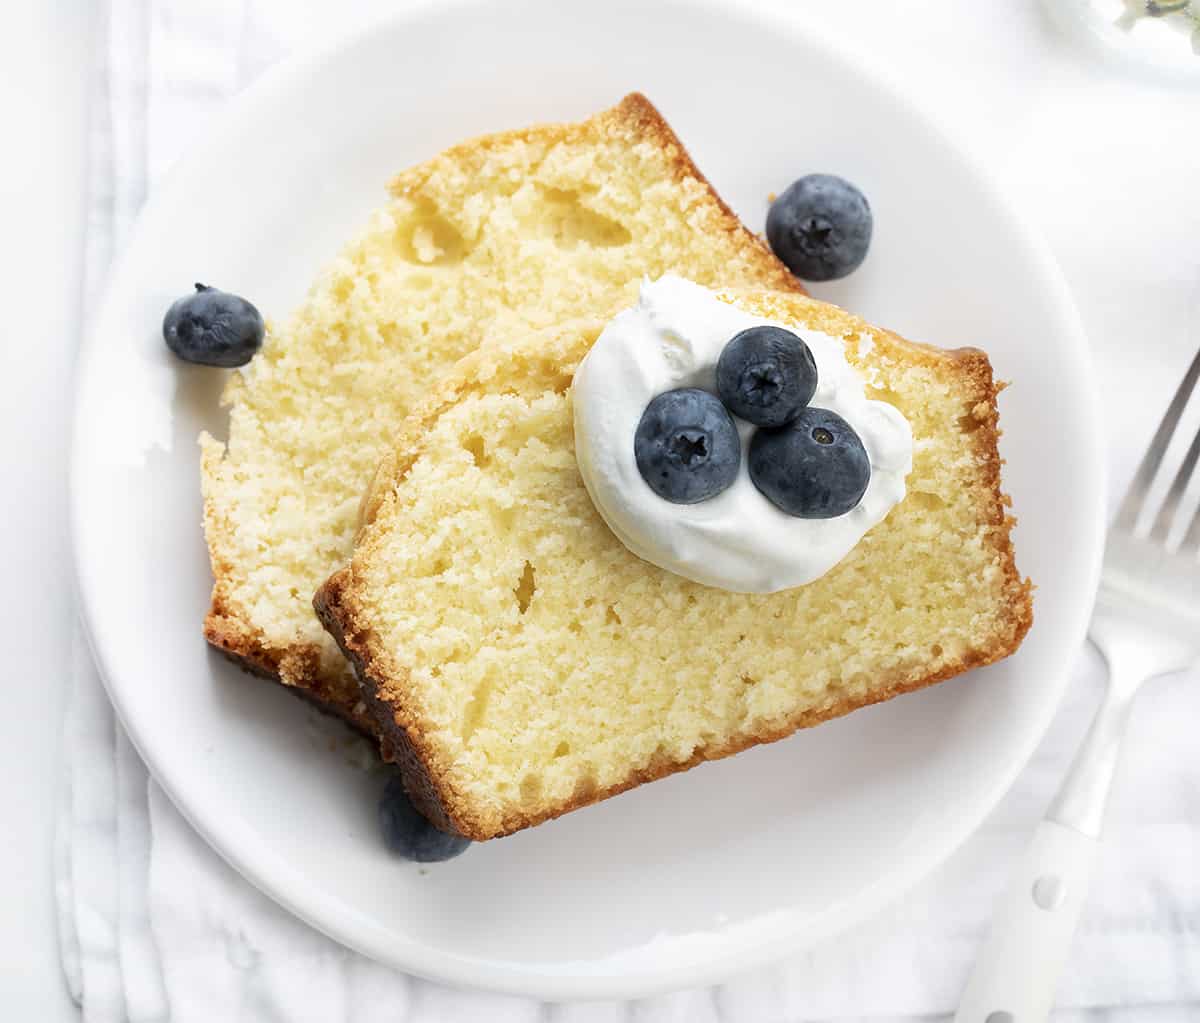 Two Pieces of Vanilla Pound Cake on a Plate. Dessert, Cake, Pound Cake, Vanilla Pound Cake, Loaf Cake, Loaf Pound Cake, Vanilla Cake, Old Fashioned Cake Recipes, Original Vanilla Pound Cake, No Vanilla Extract Cake, recipes, iambaker, i am baker